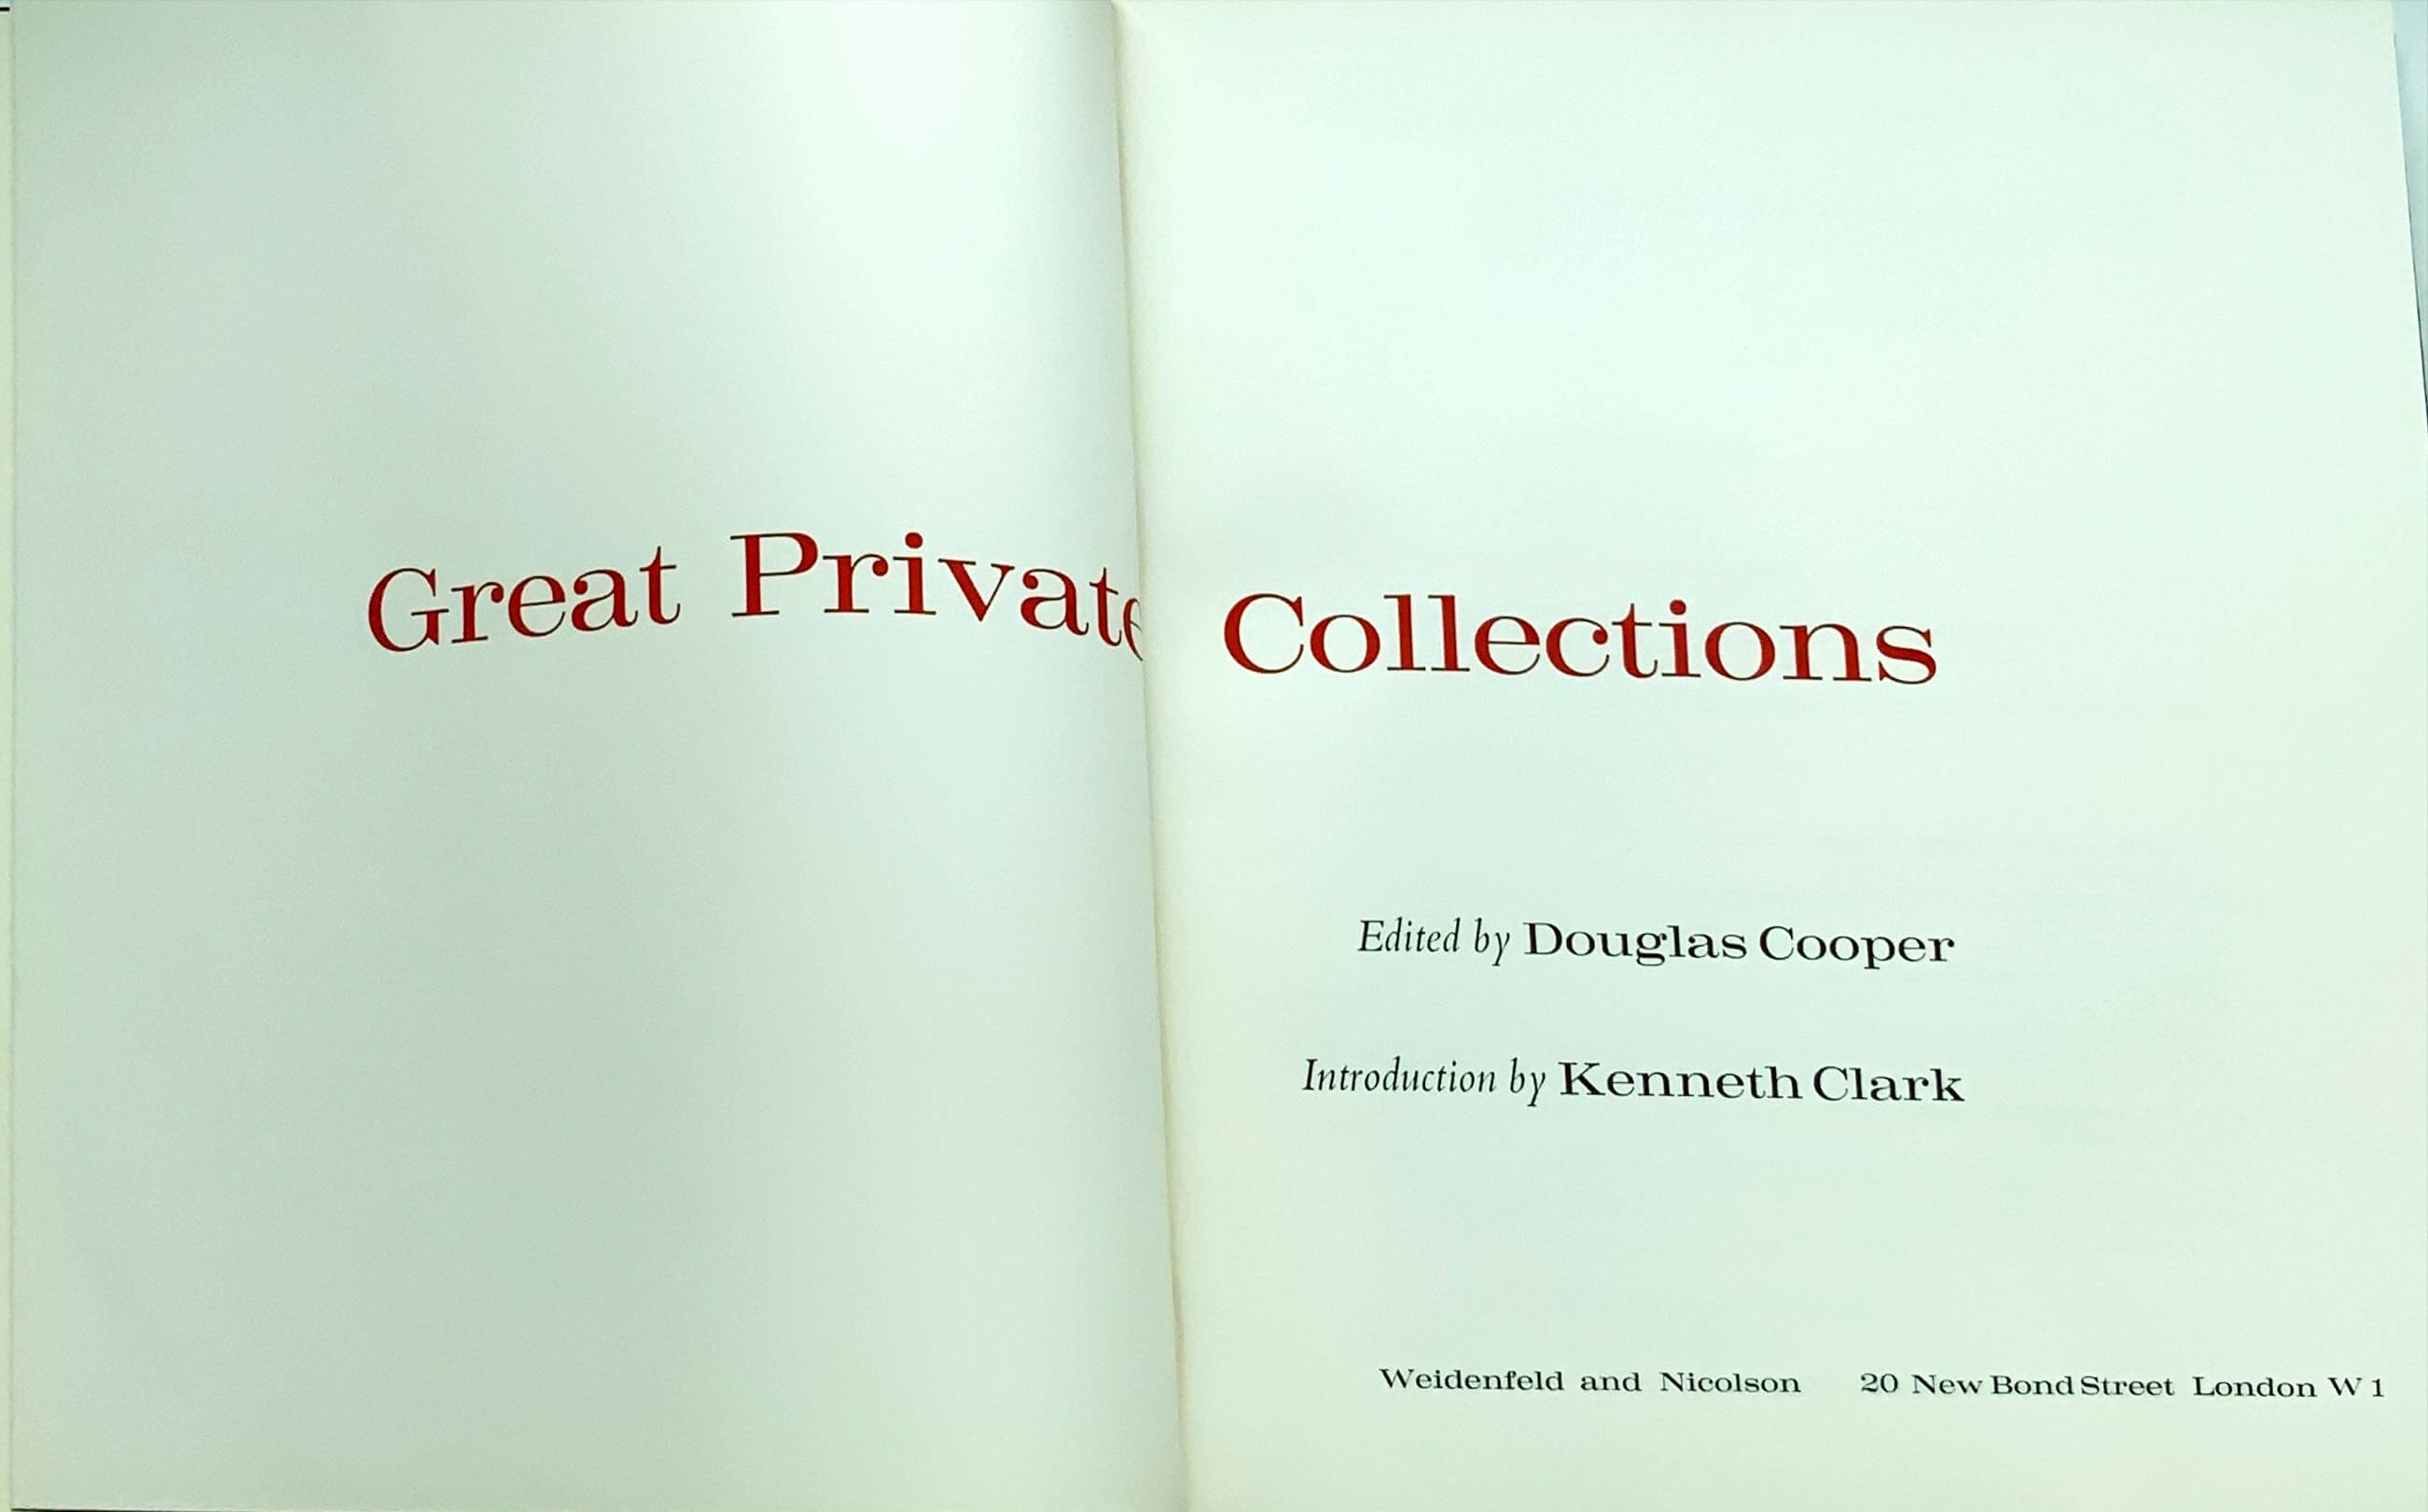 Conzett & Huber: Great Private Collections. 1963